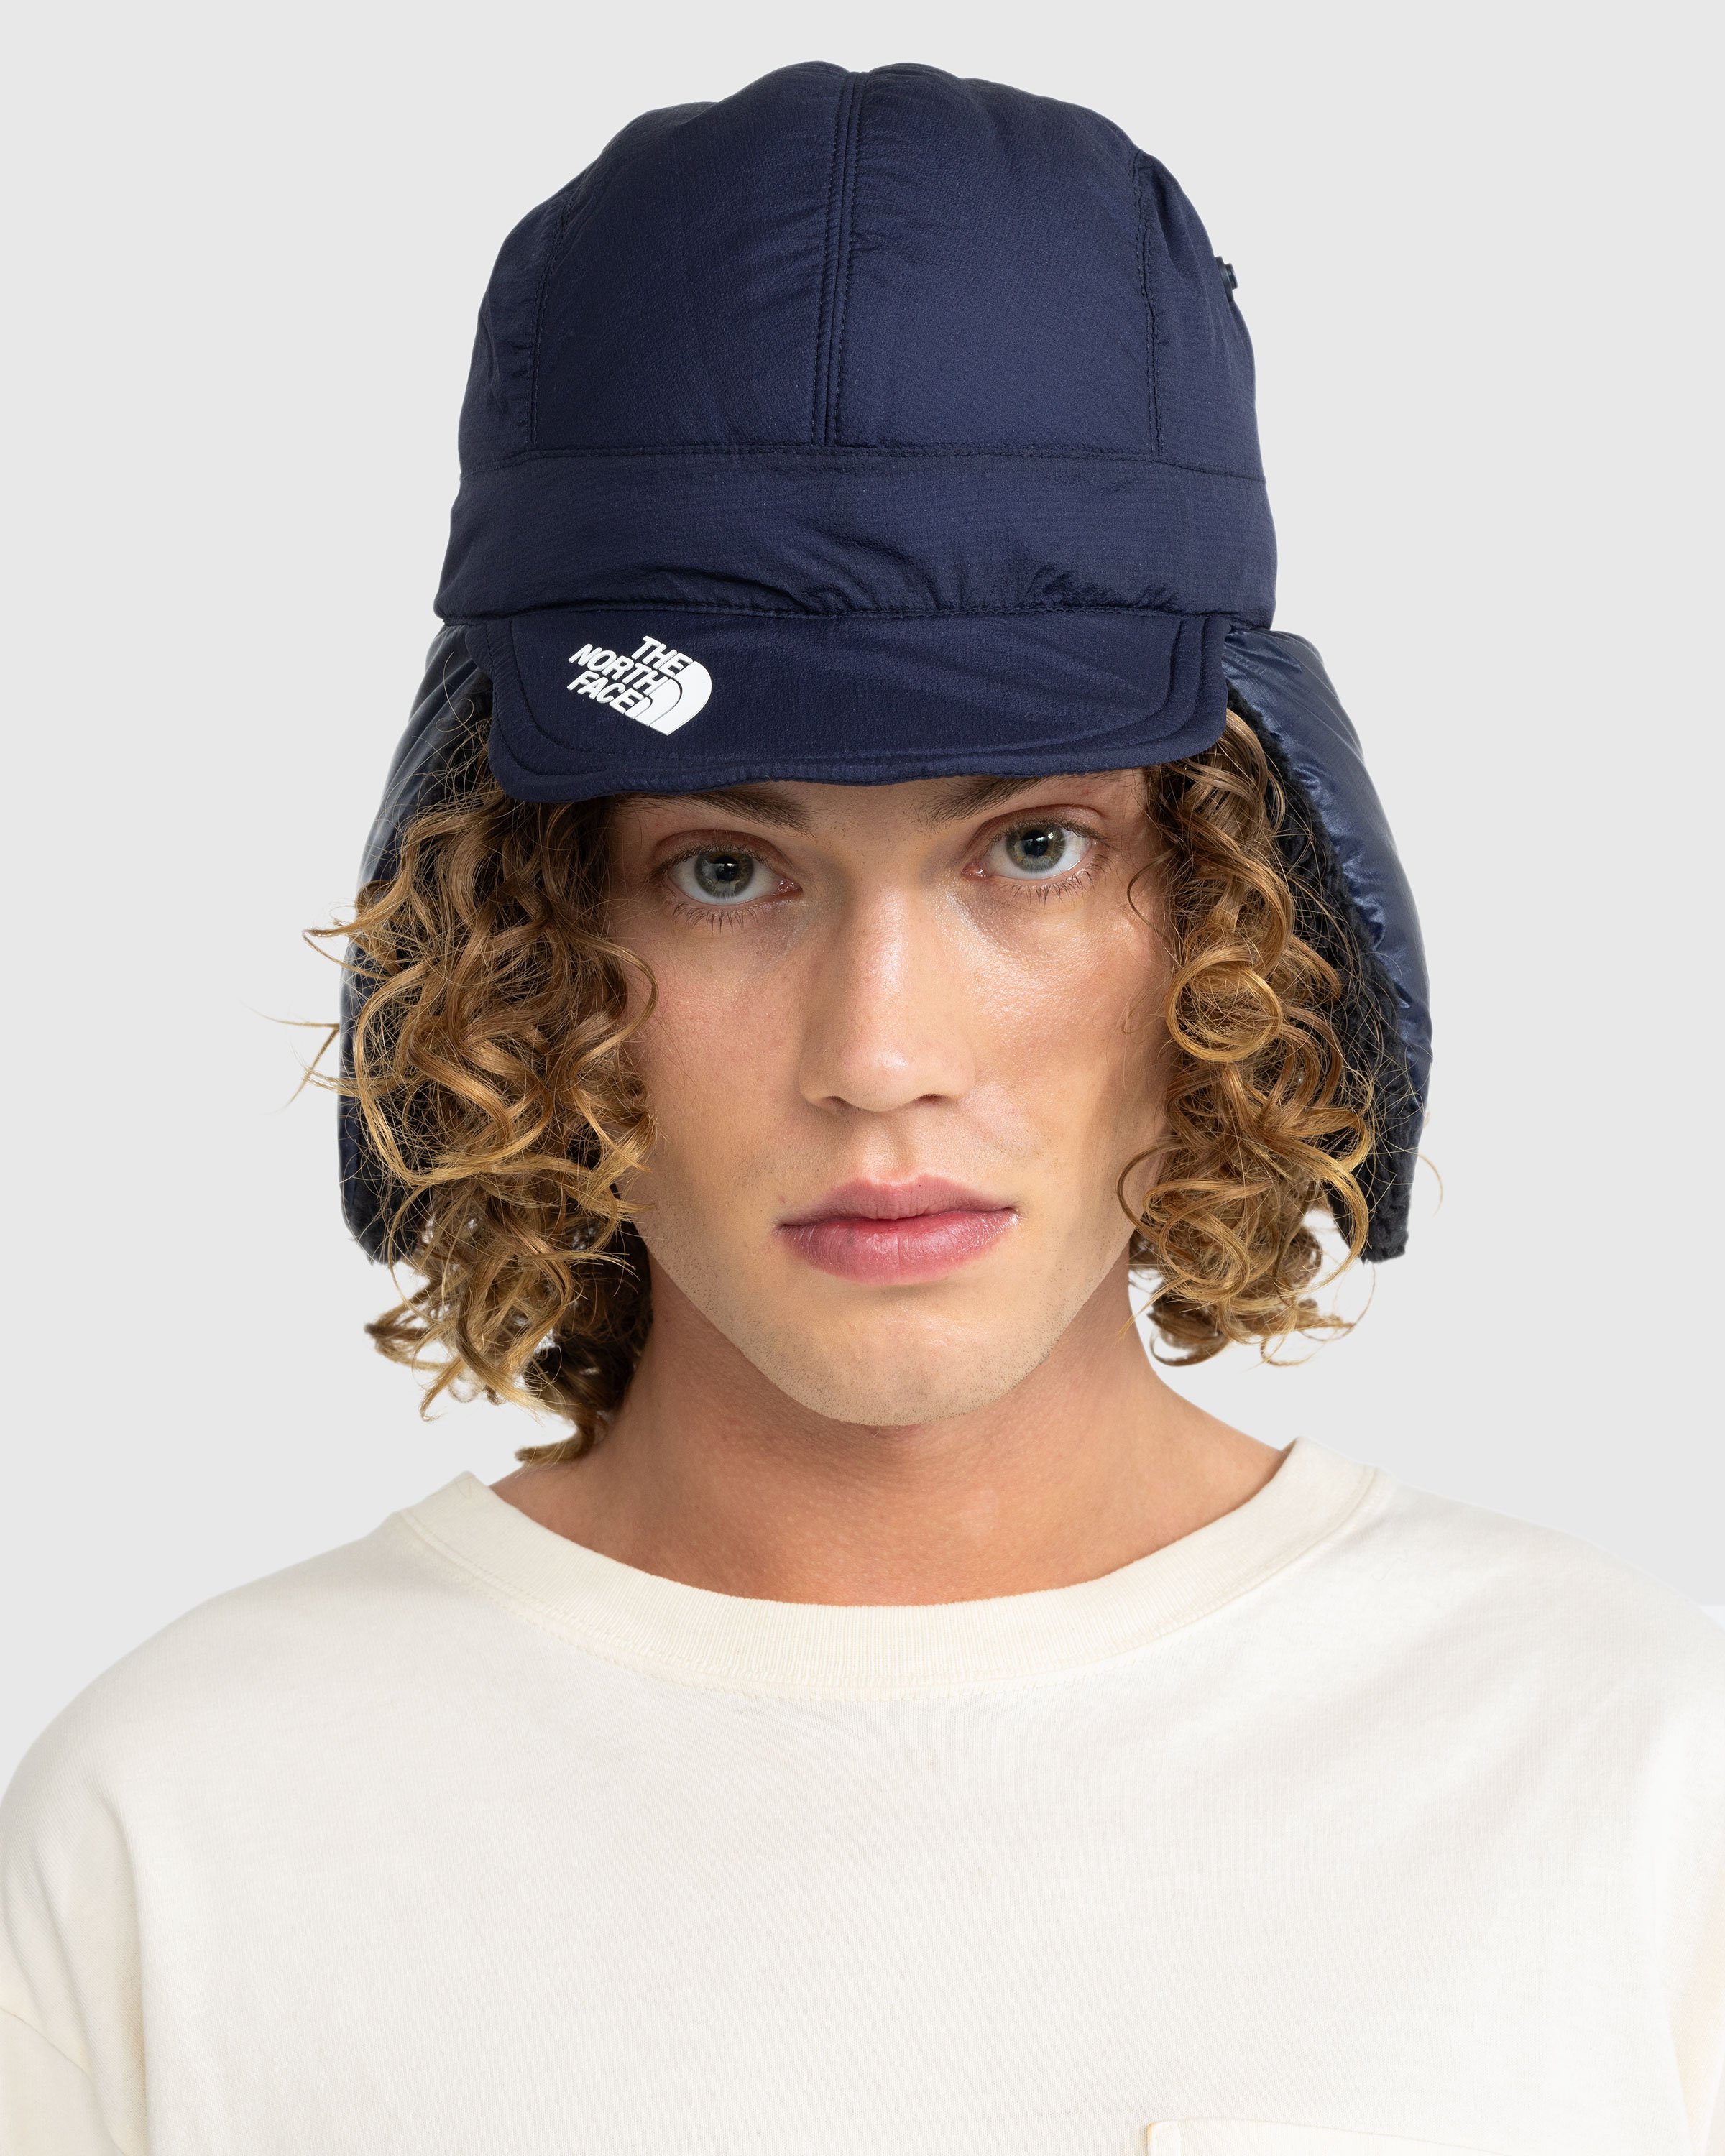 The North Face x UNDERCOVER - Soukuu Down Cap Black/Navy - Accessories - Multi - Image 4